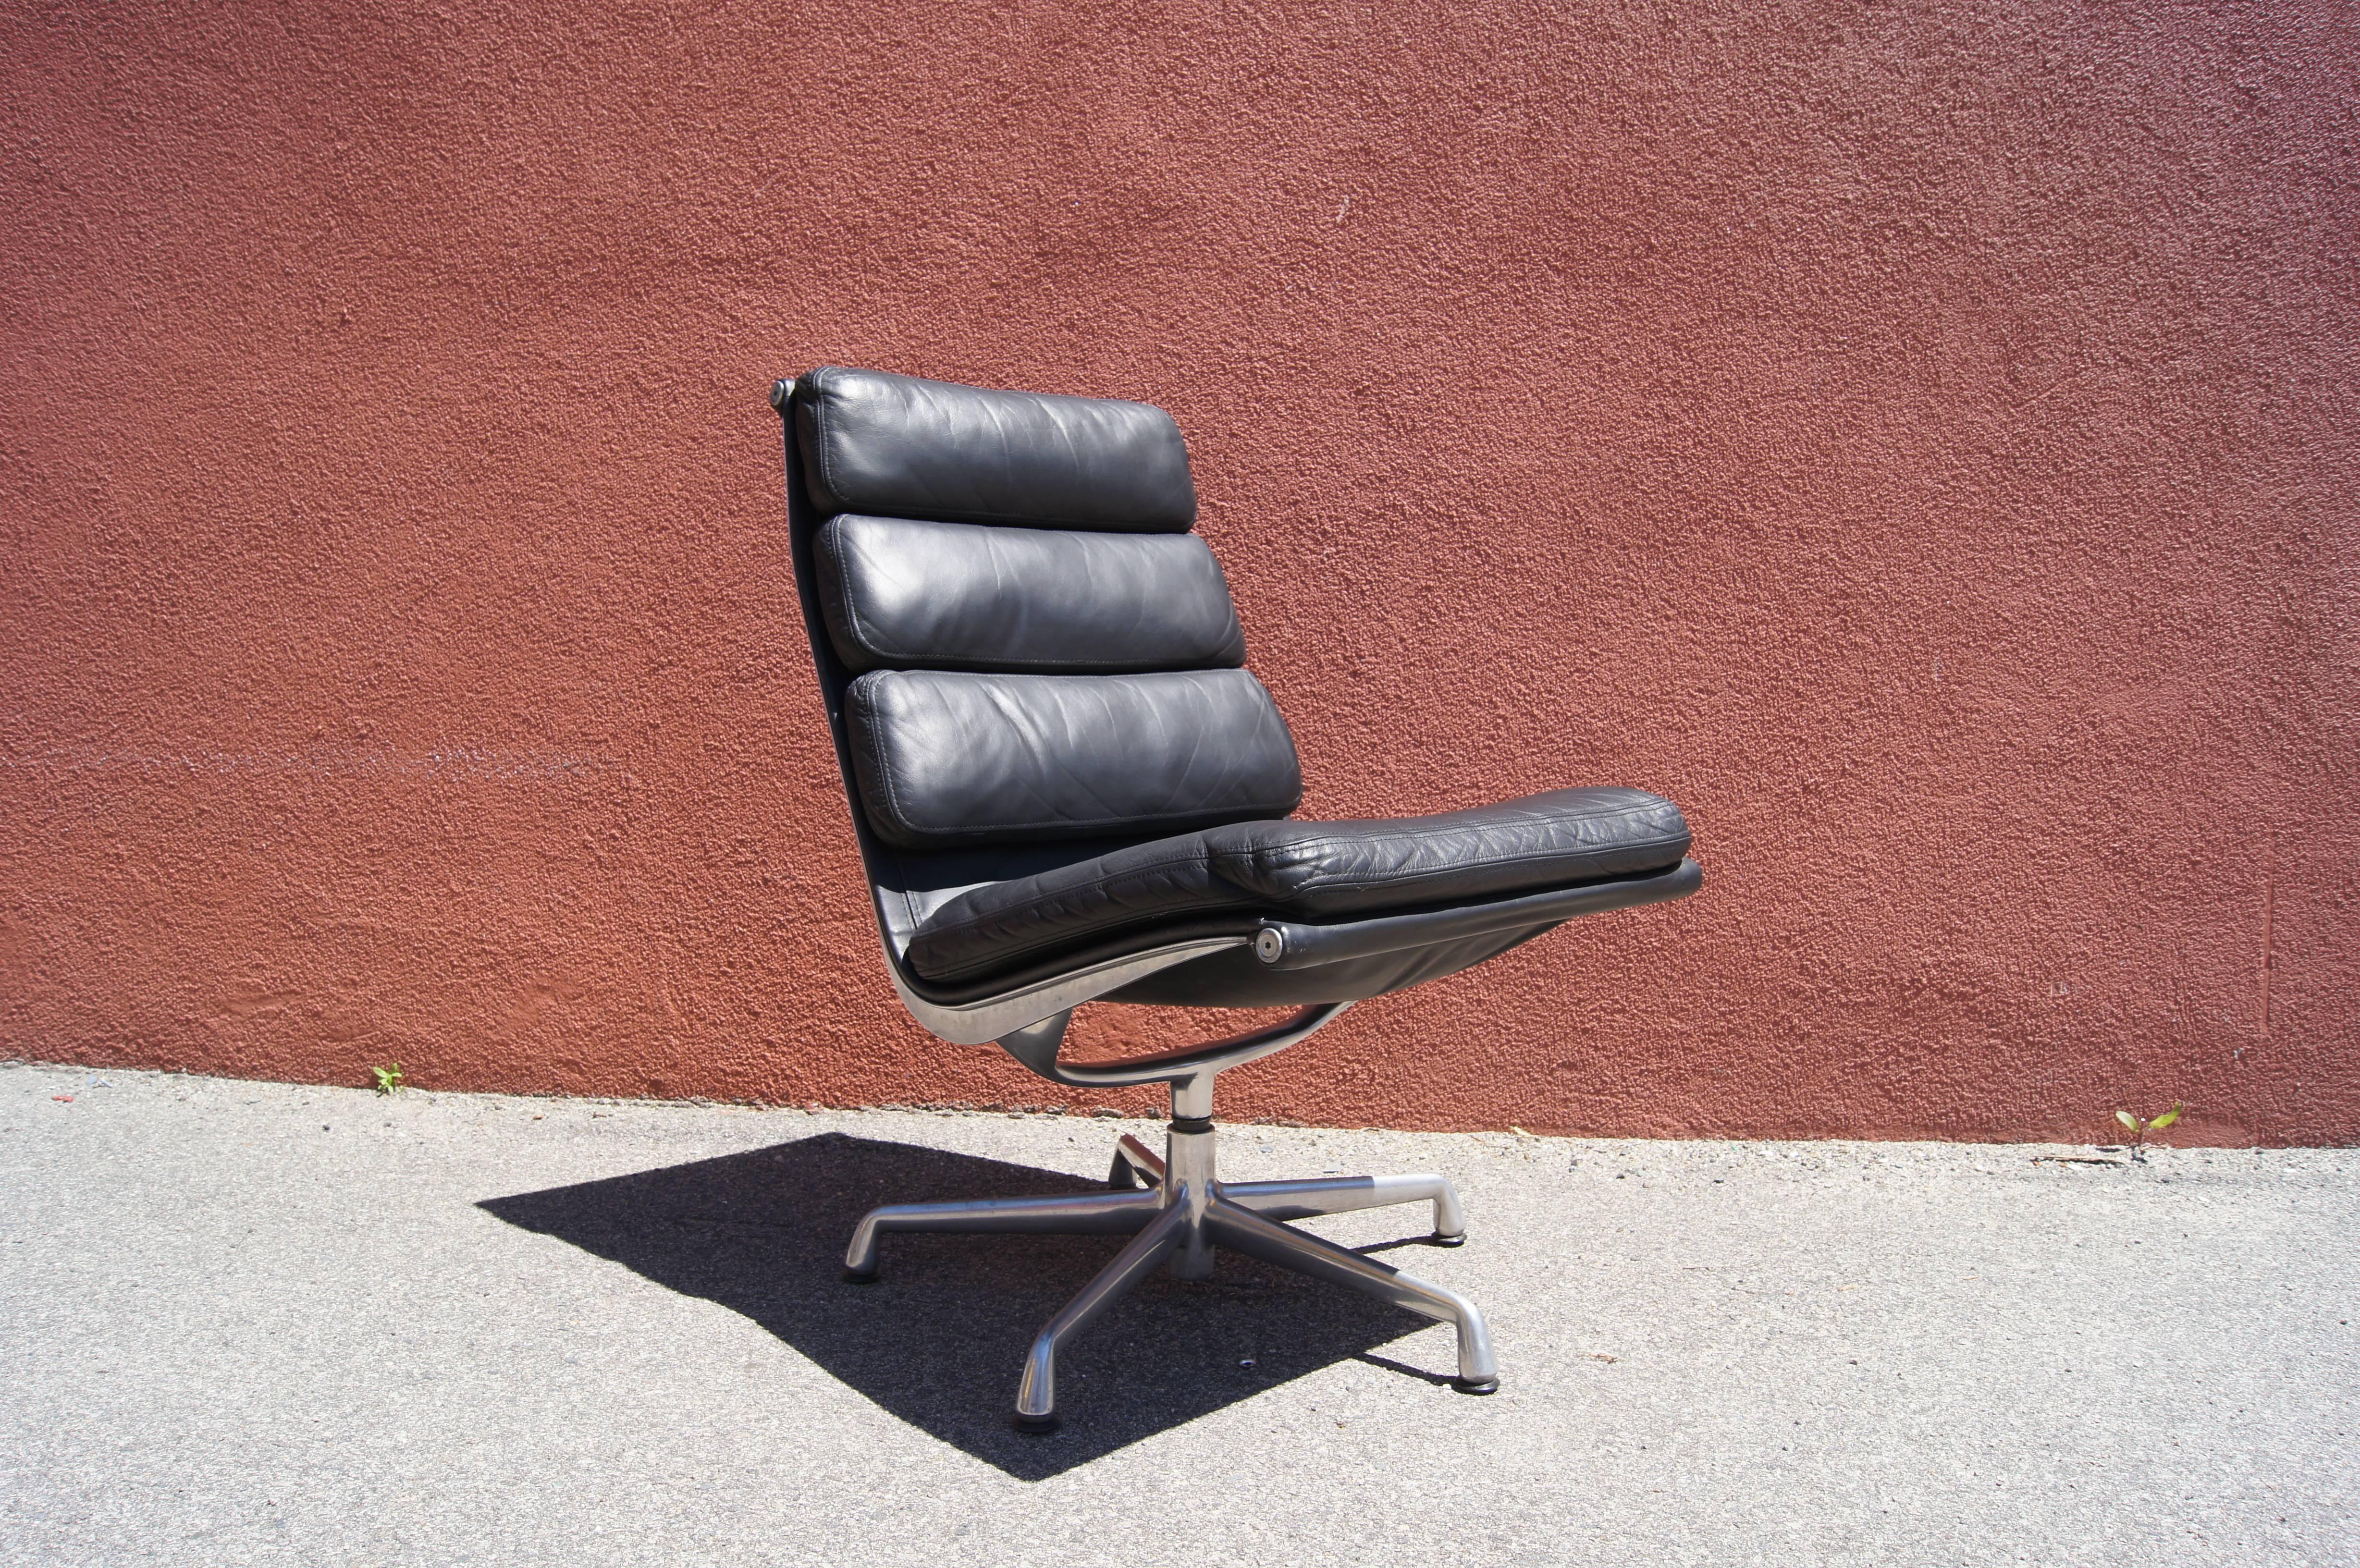 Charles and Ray Eames designed the soft pad series for Herman Miller in 1969 to complement their lounge chair and chaise. An example of the armless version of the executive chair, this features a high-back aluminum frame upholstered in black leather